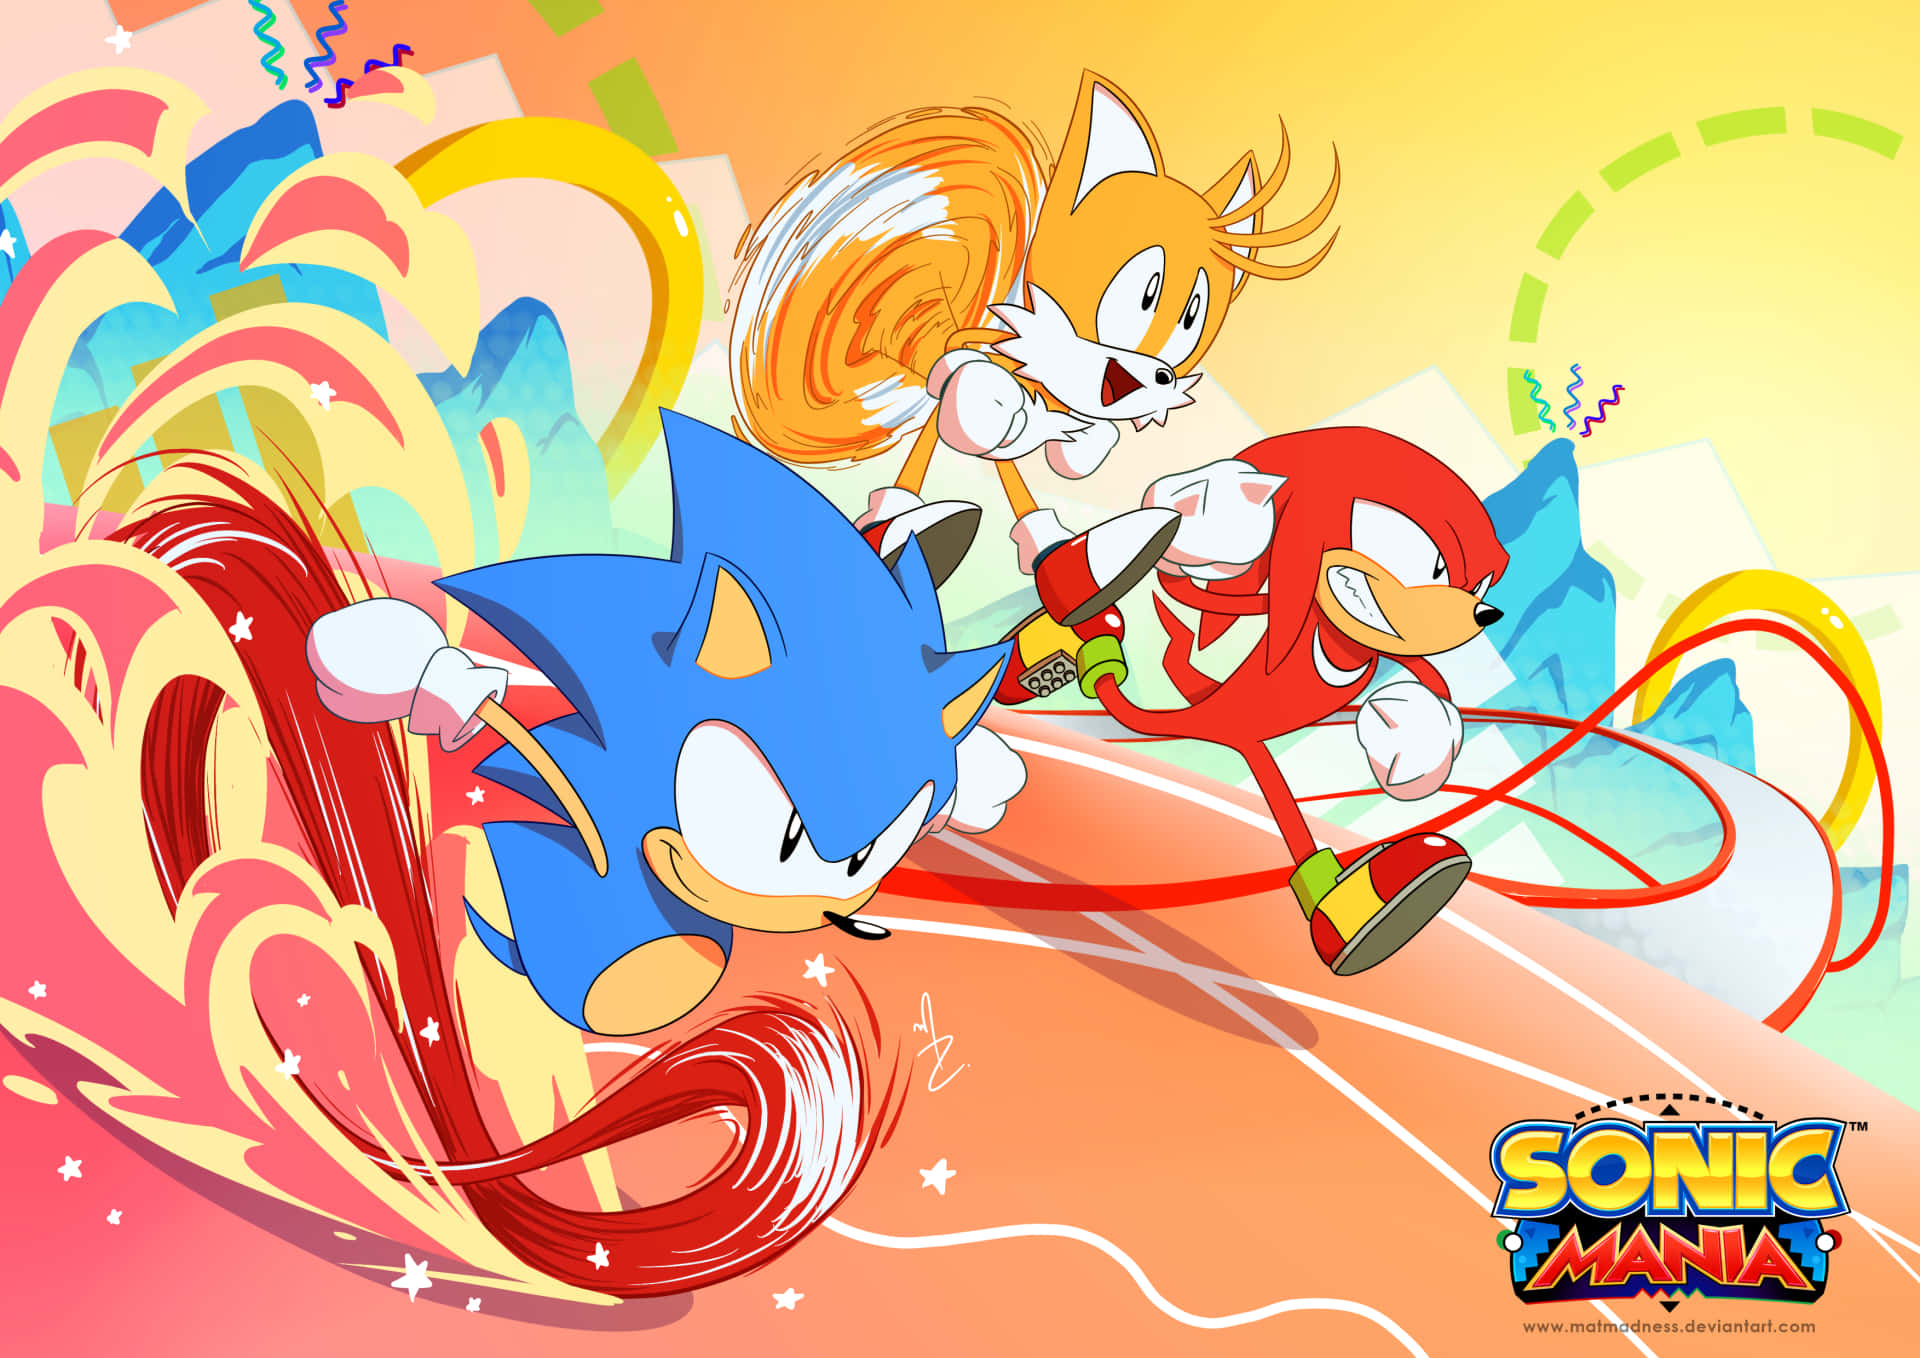 Play The Ultimate Classic Side-scroller With Sonic Mania! Background